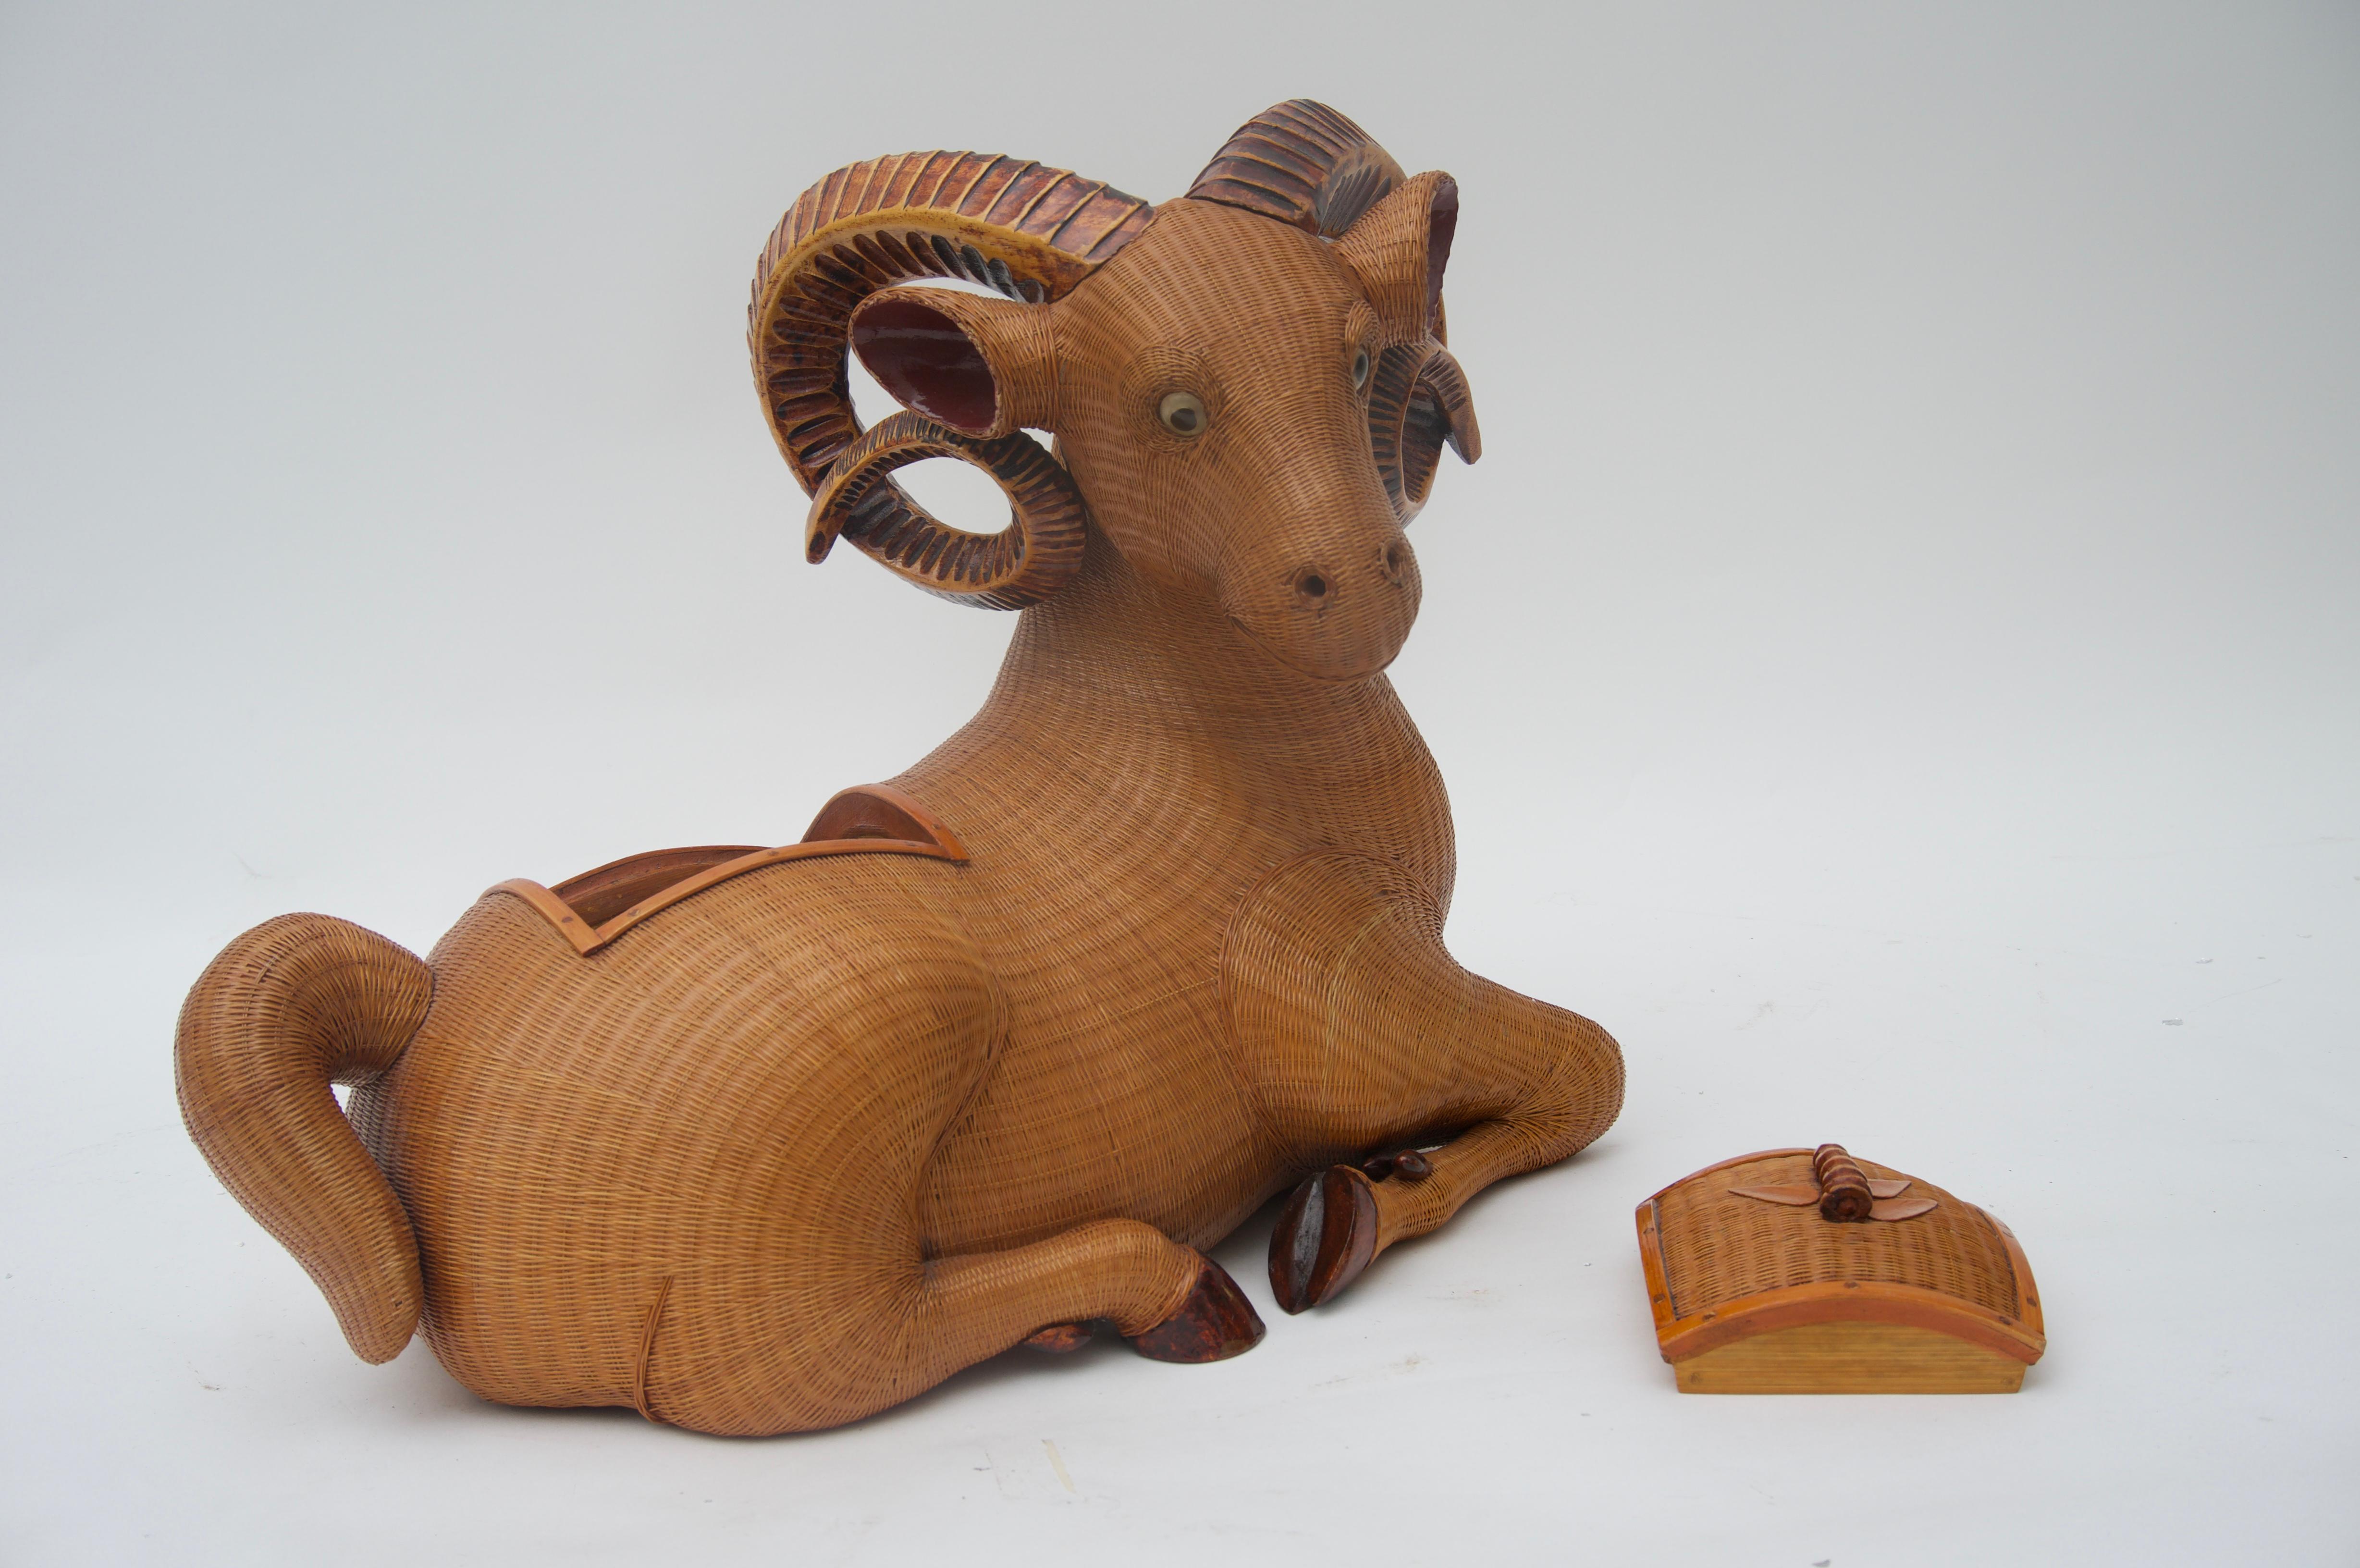 Handwoven Straw Ram Figure In Good Condition For Sale In West Palm Beach, FL